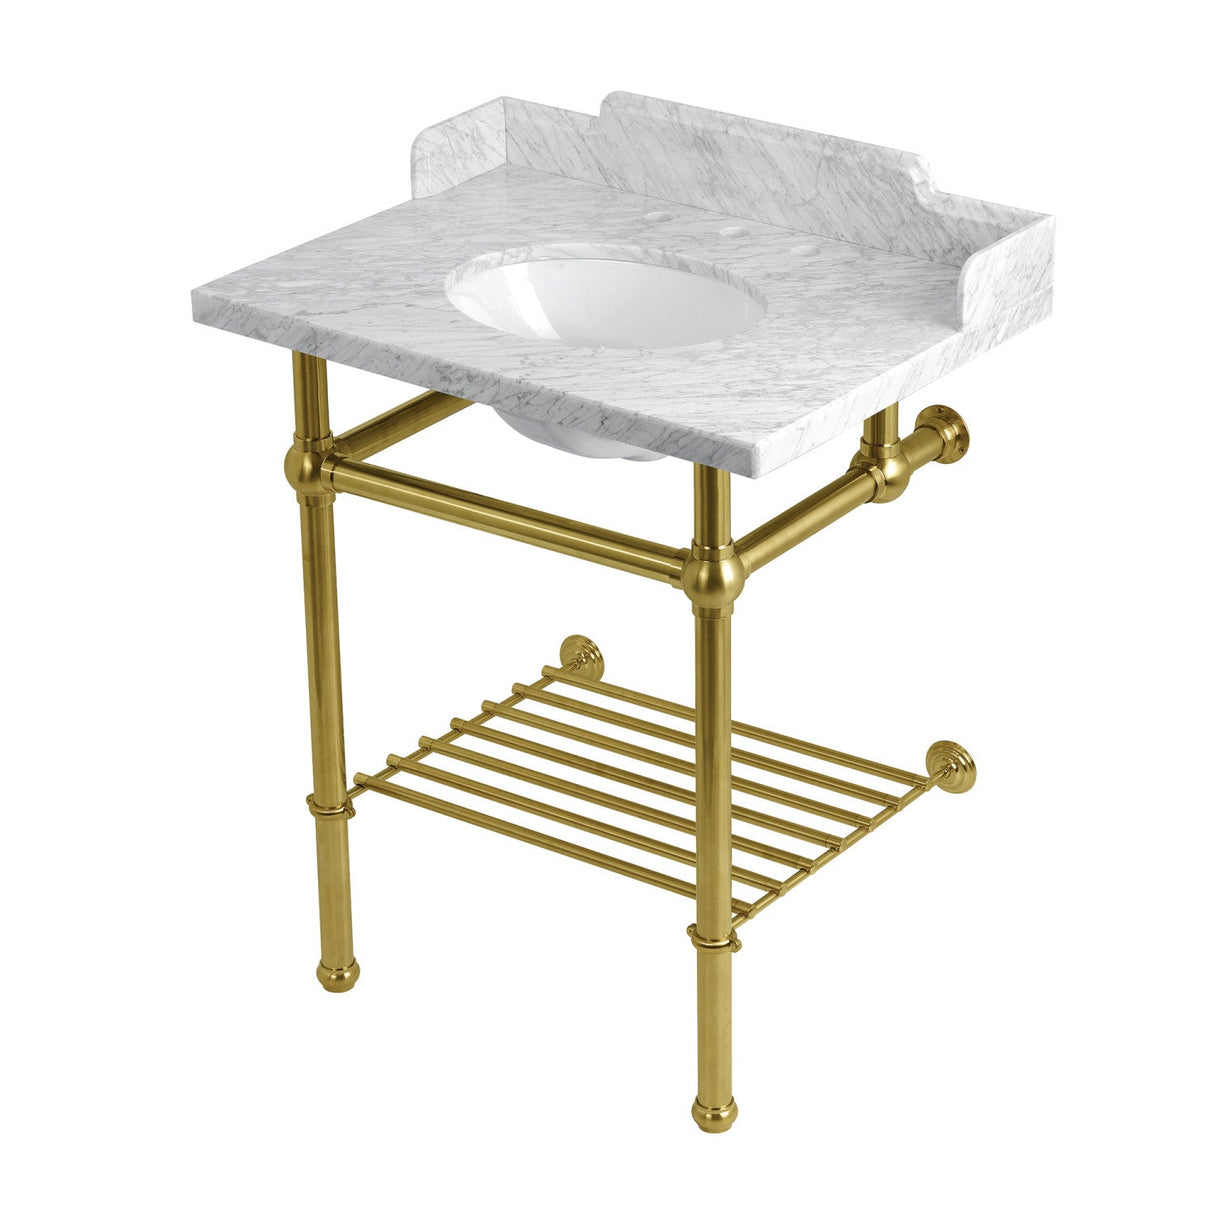 Pemberton LMS30MBB7 30-Inch Console Sink with Brass Legs (8-Inch, 3 Hole), Marble White/Brushed Brass